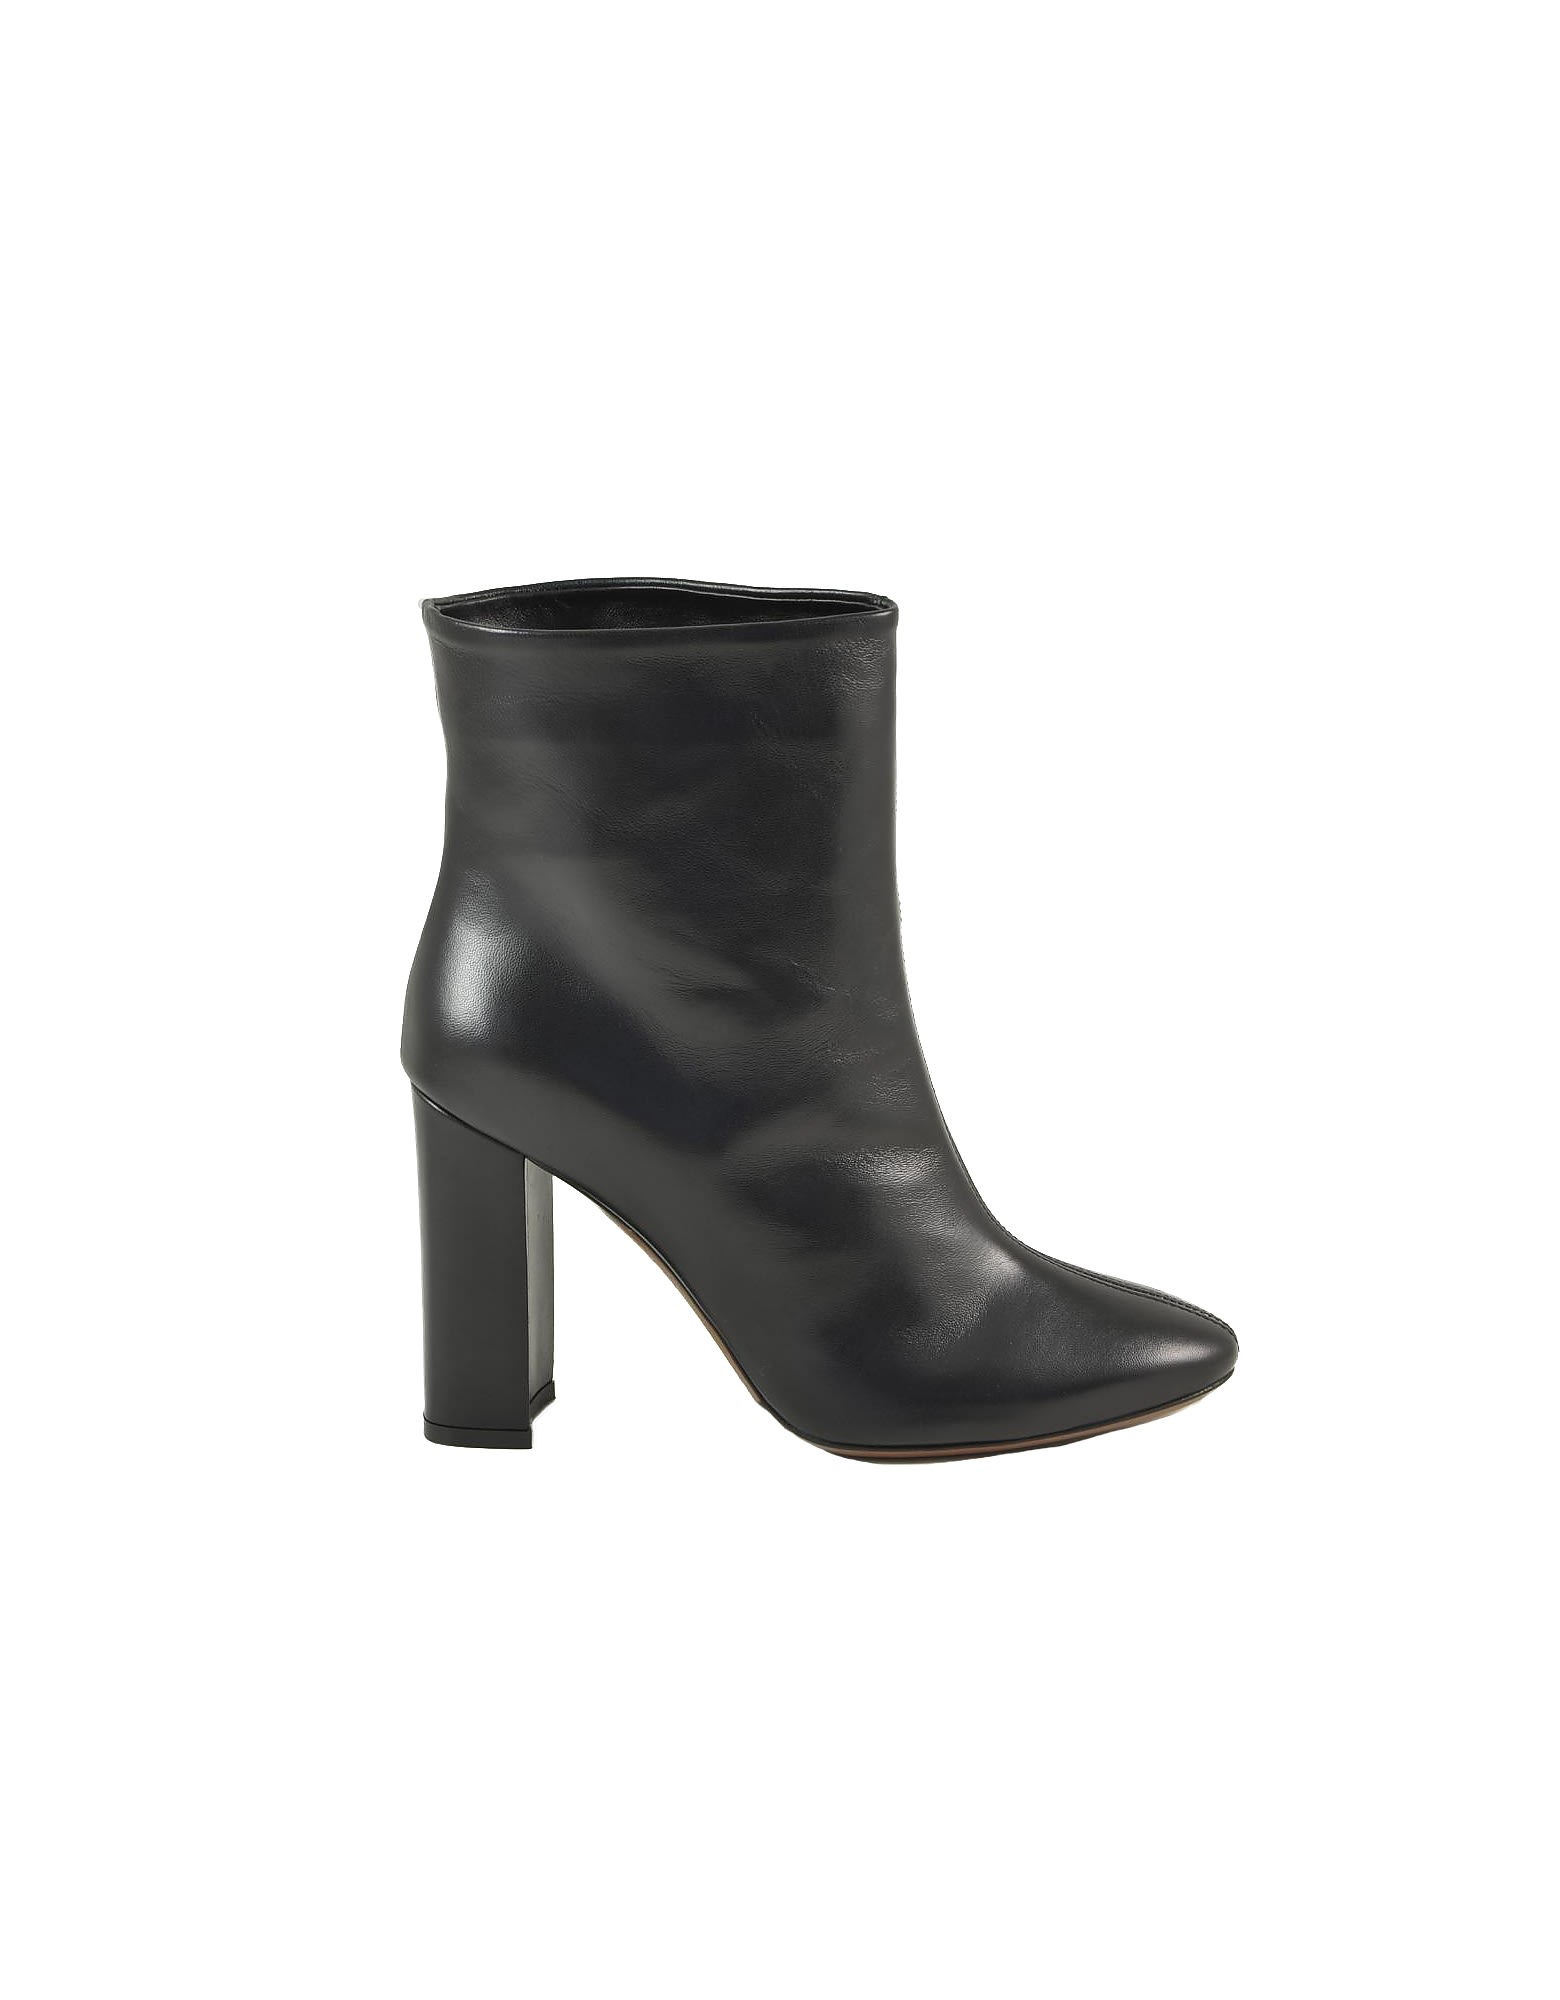 Lautre Chose Black Leather High Heel Booties